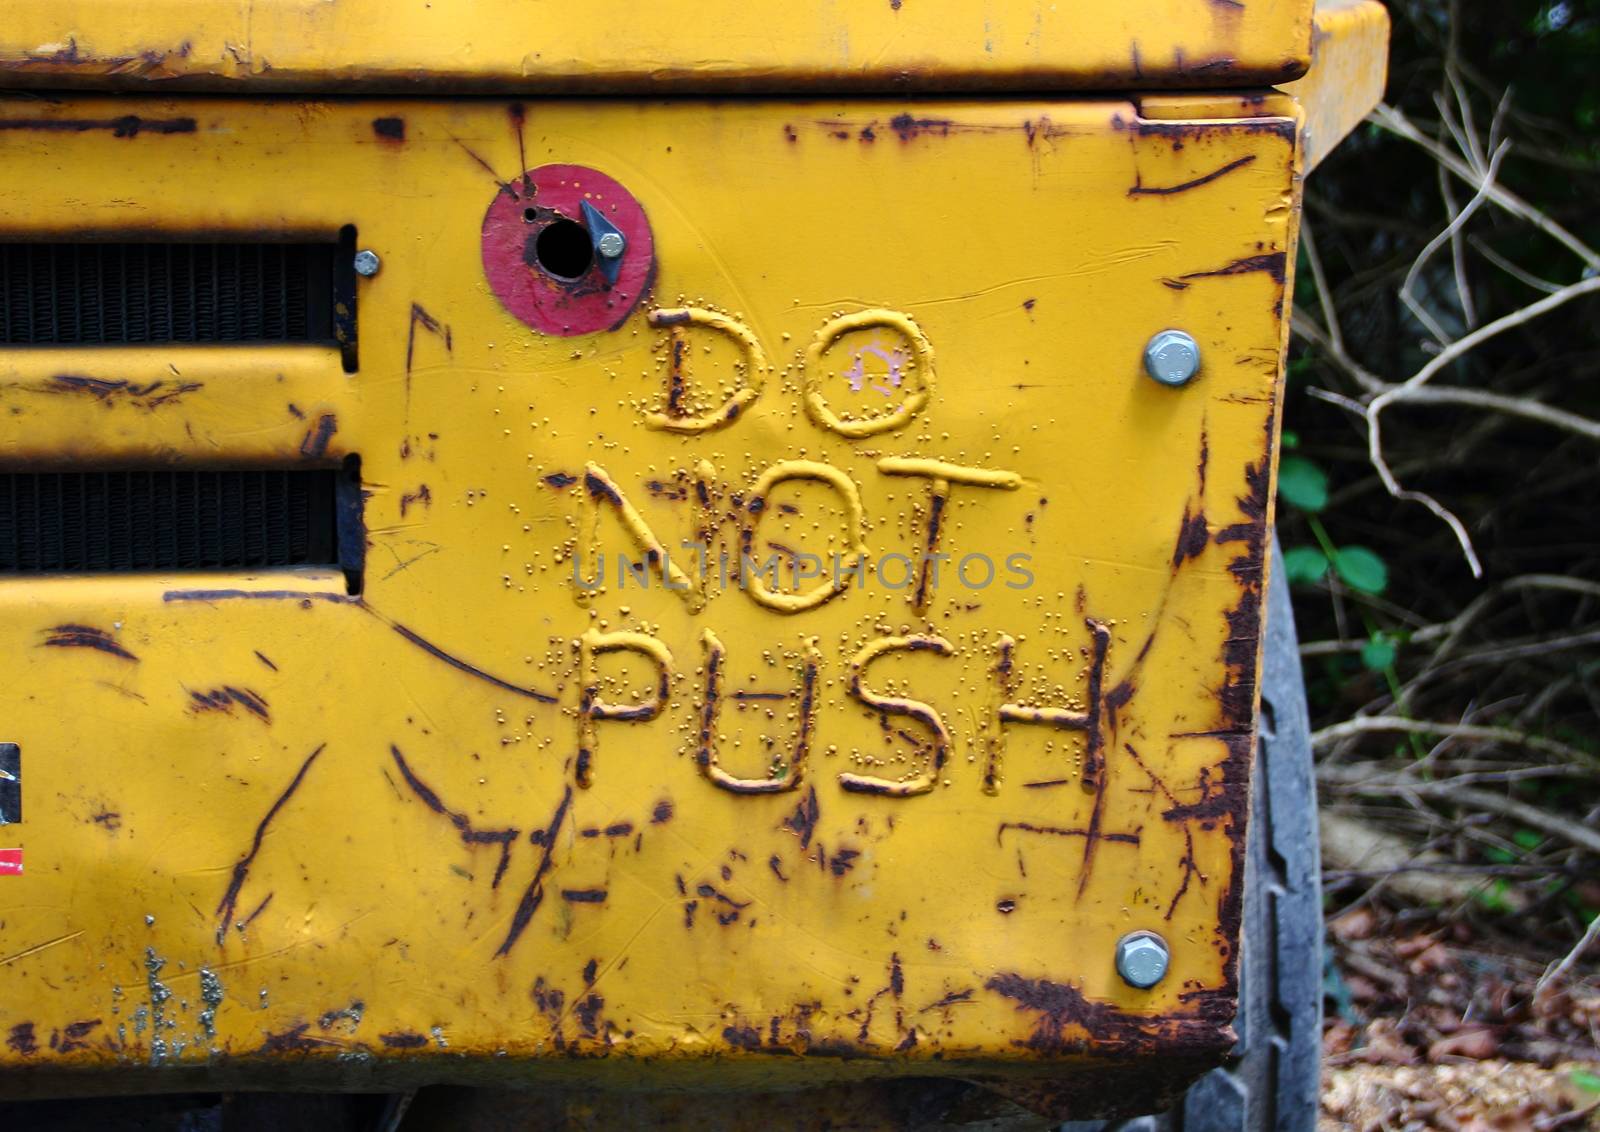 Do not push welded sign on rear of truck